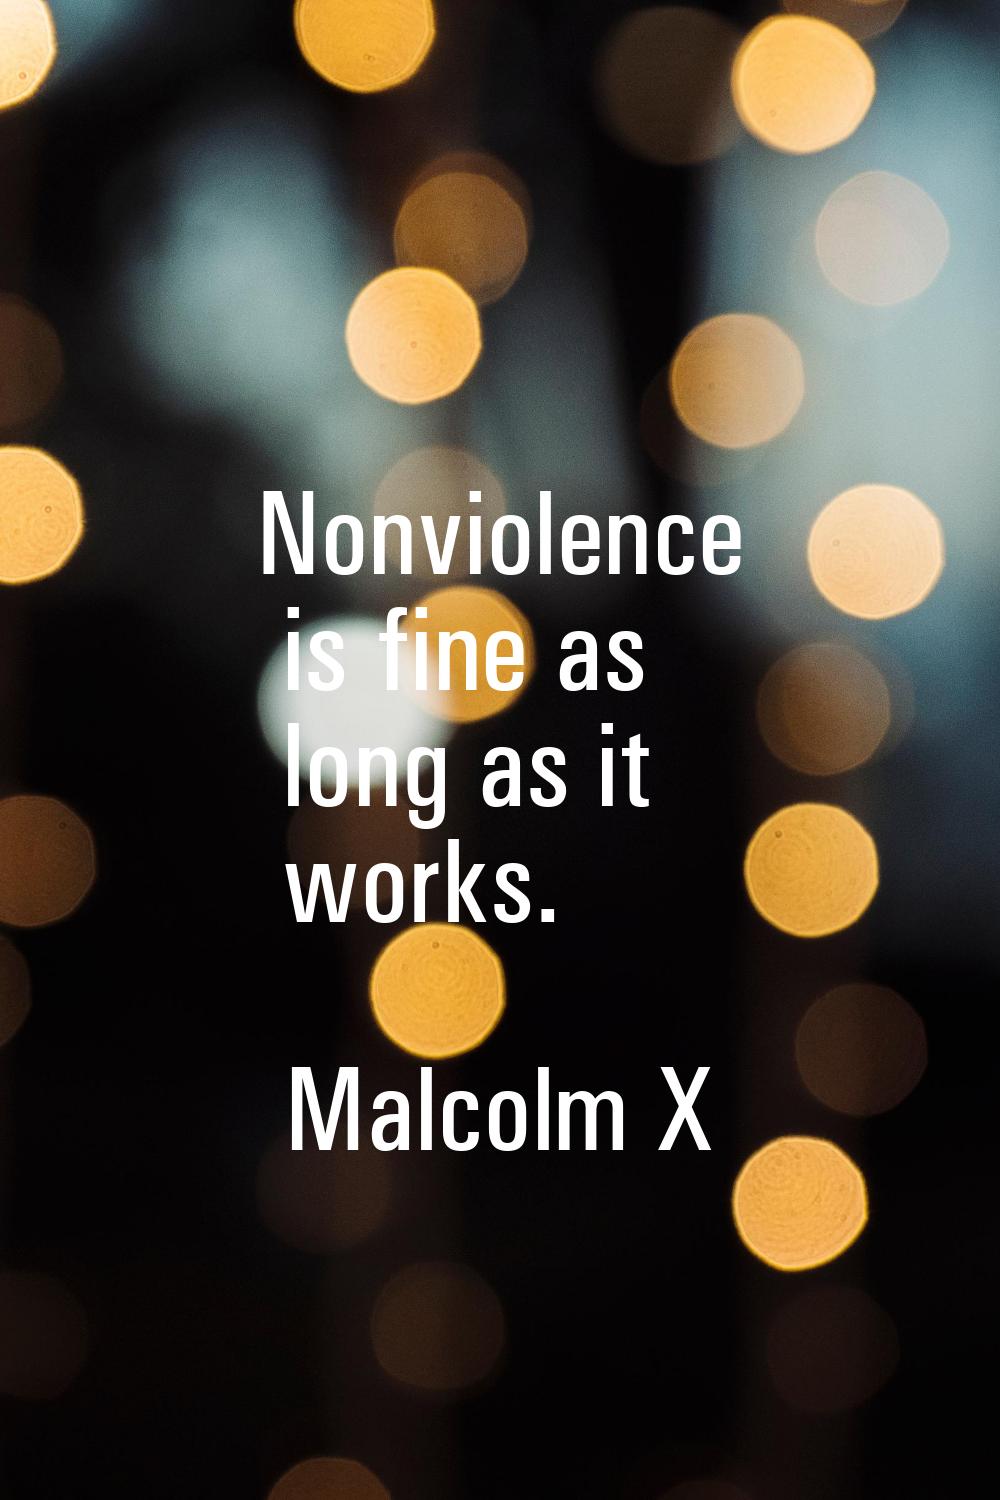 Nonviolence is fine as long as it works.